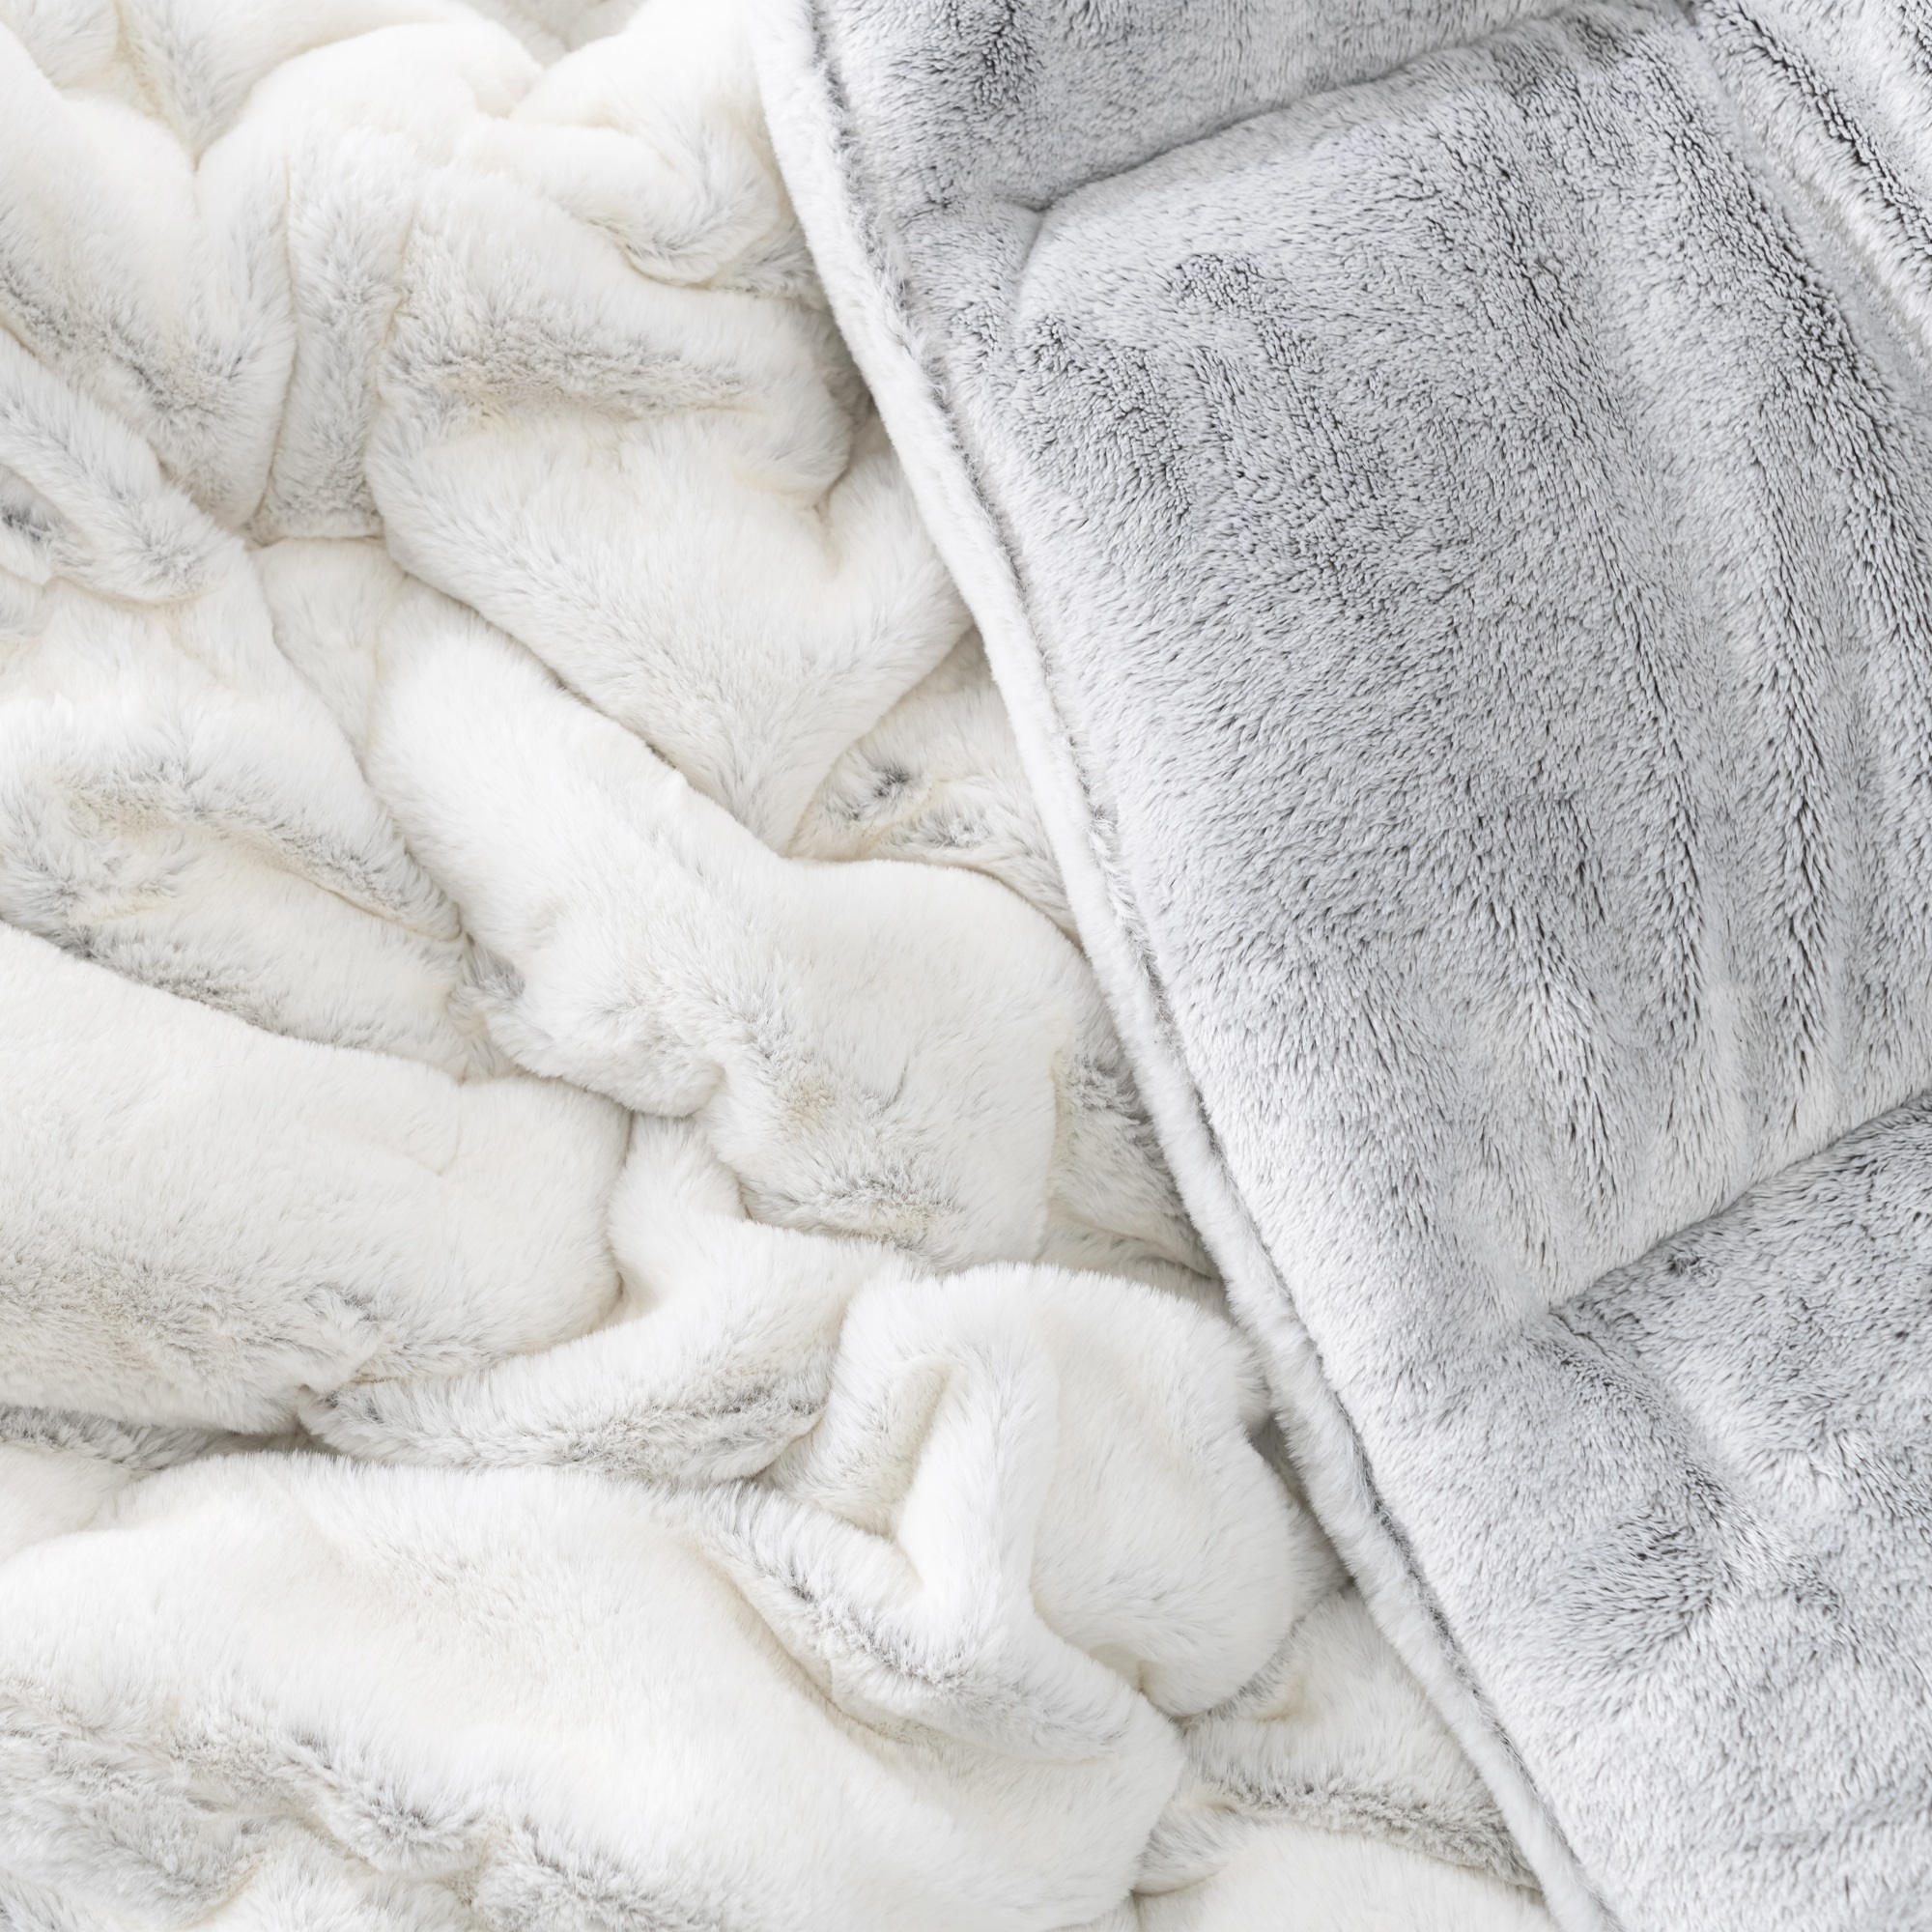 Multicolor XL Twin, XL Queen, or XL King Bedding Set Pure Whiteout and Frosted Chocolate Best Selling Chunky Bunny Blanket